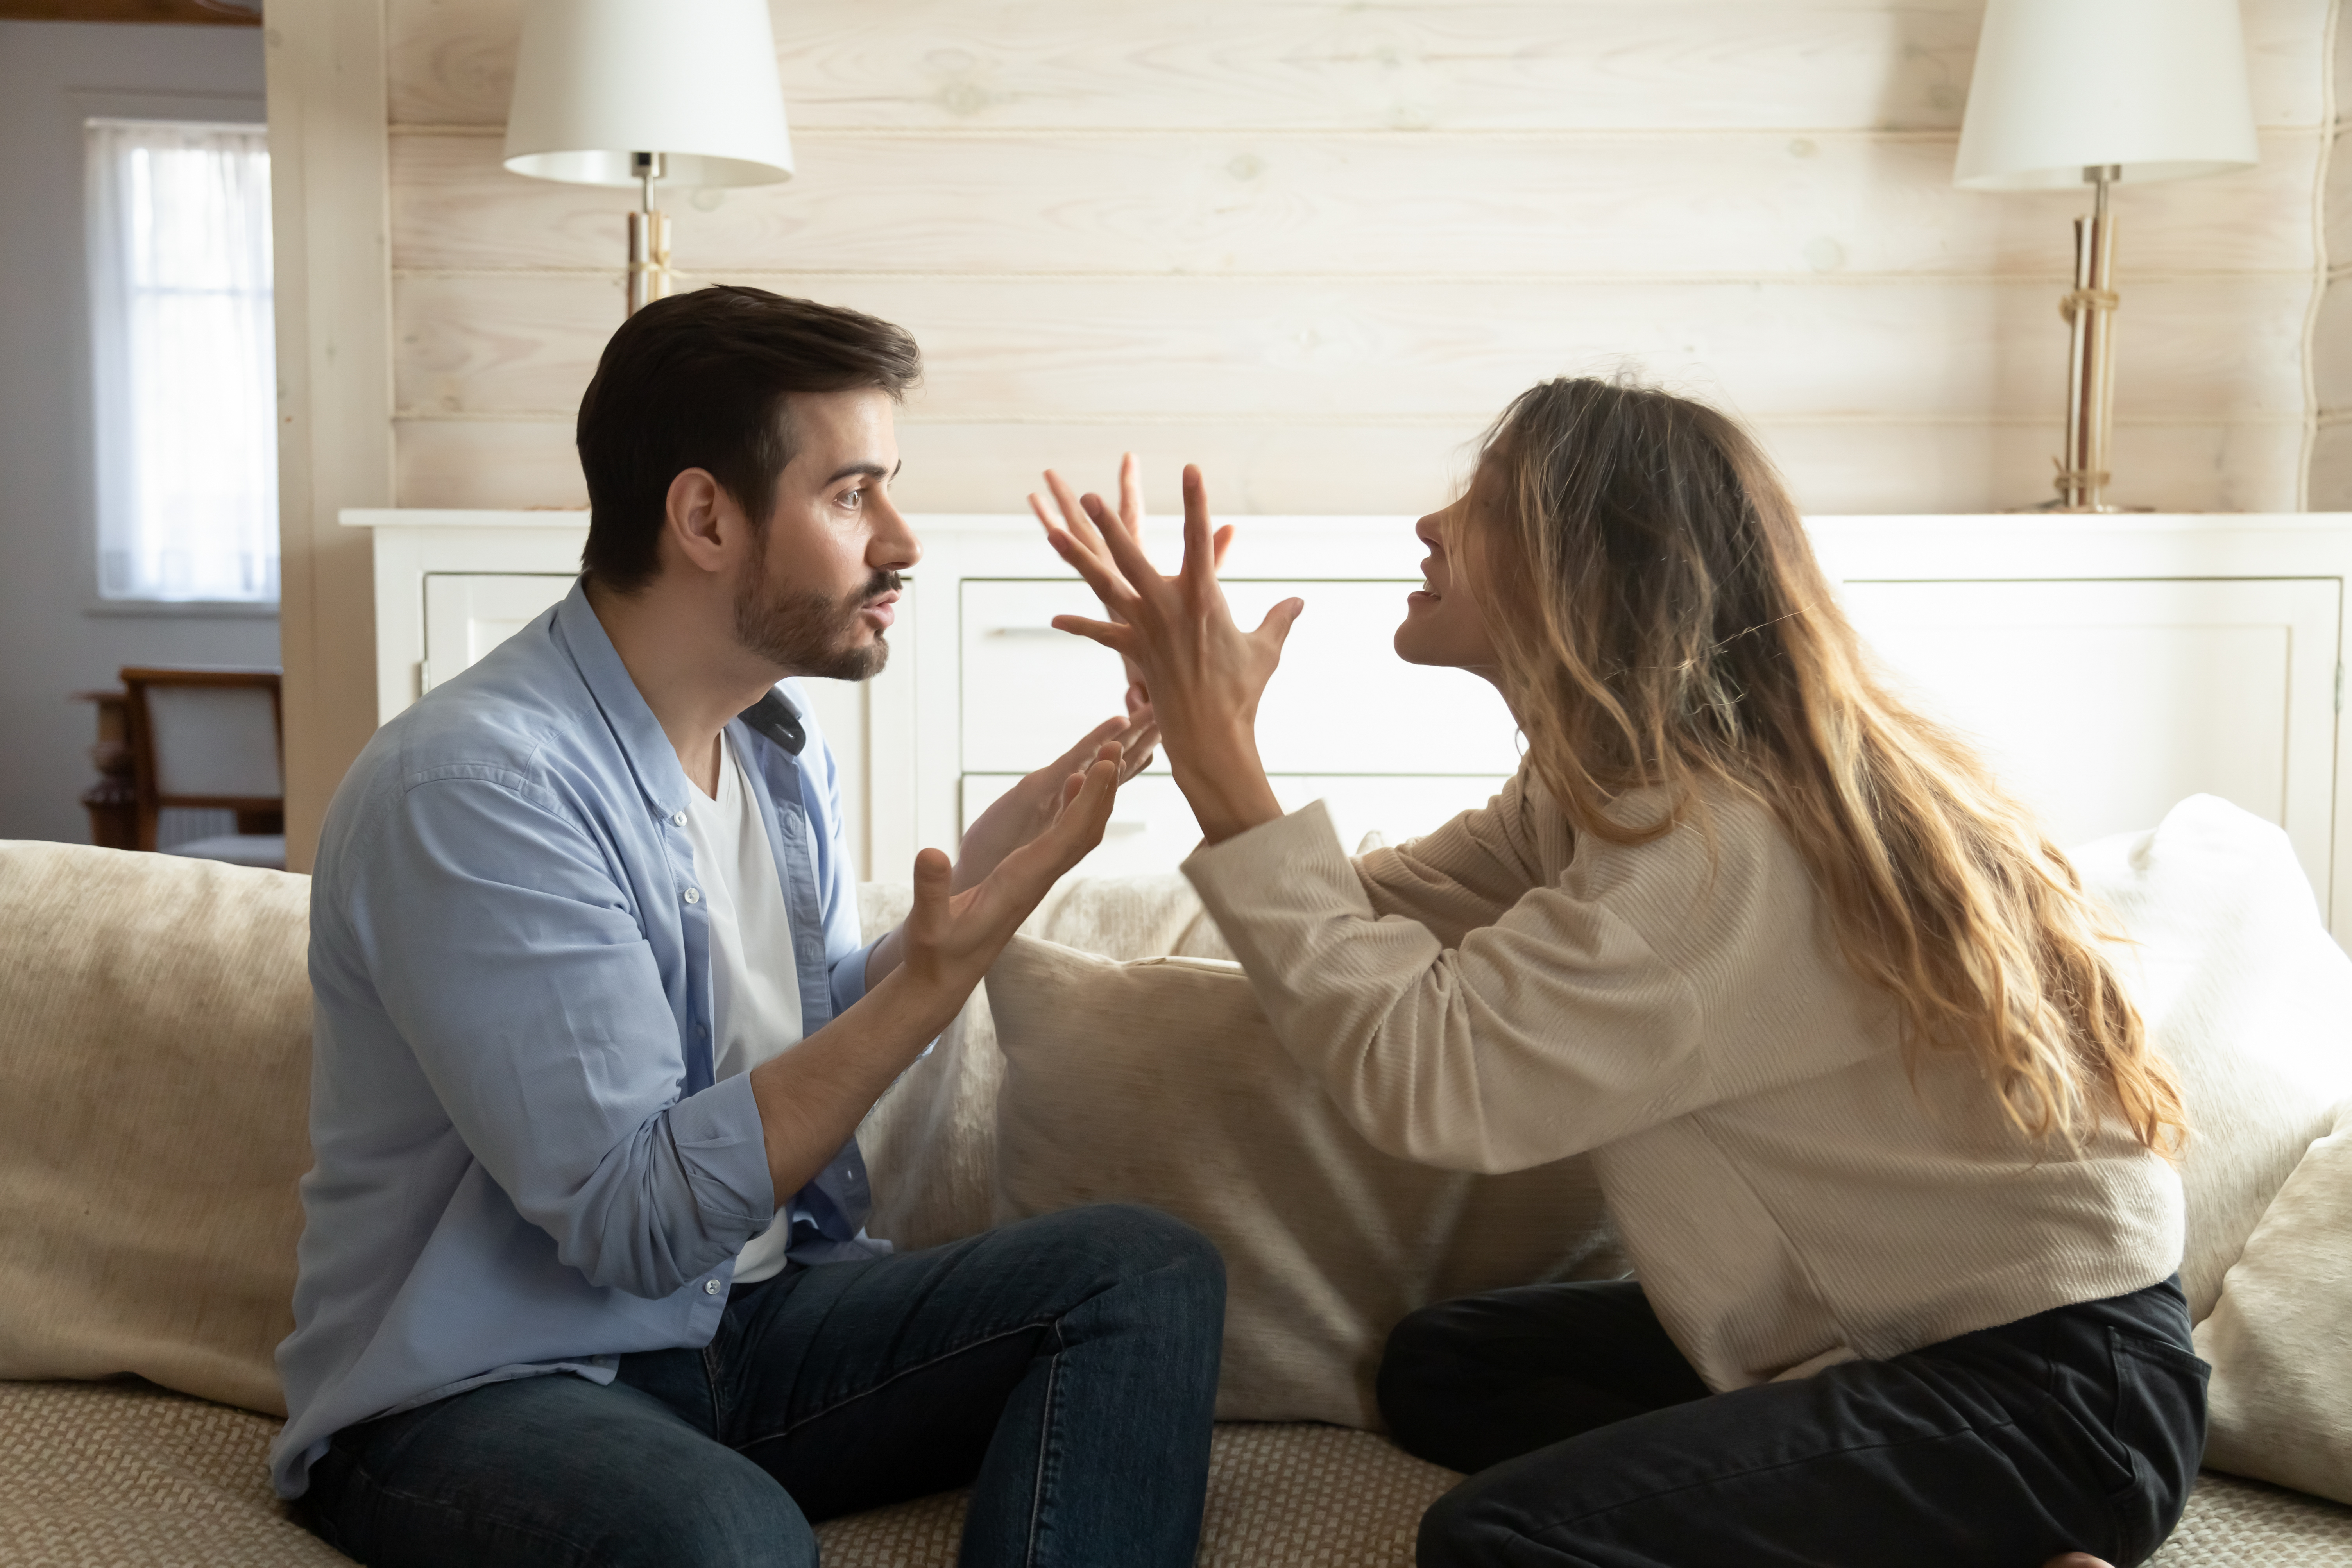 A photo of a couple arguing in the living room | Source: Shutterstock